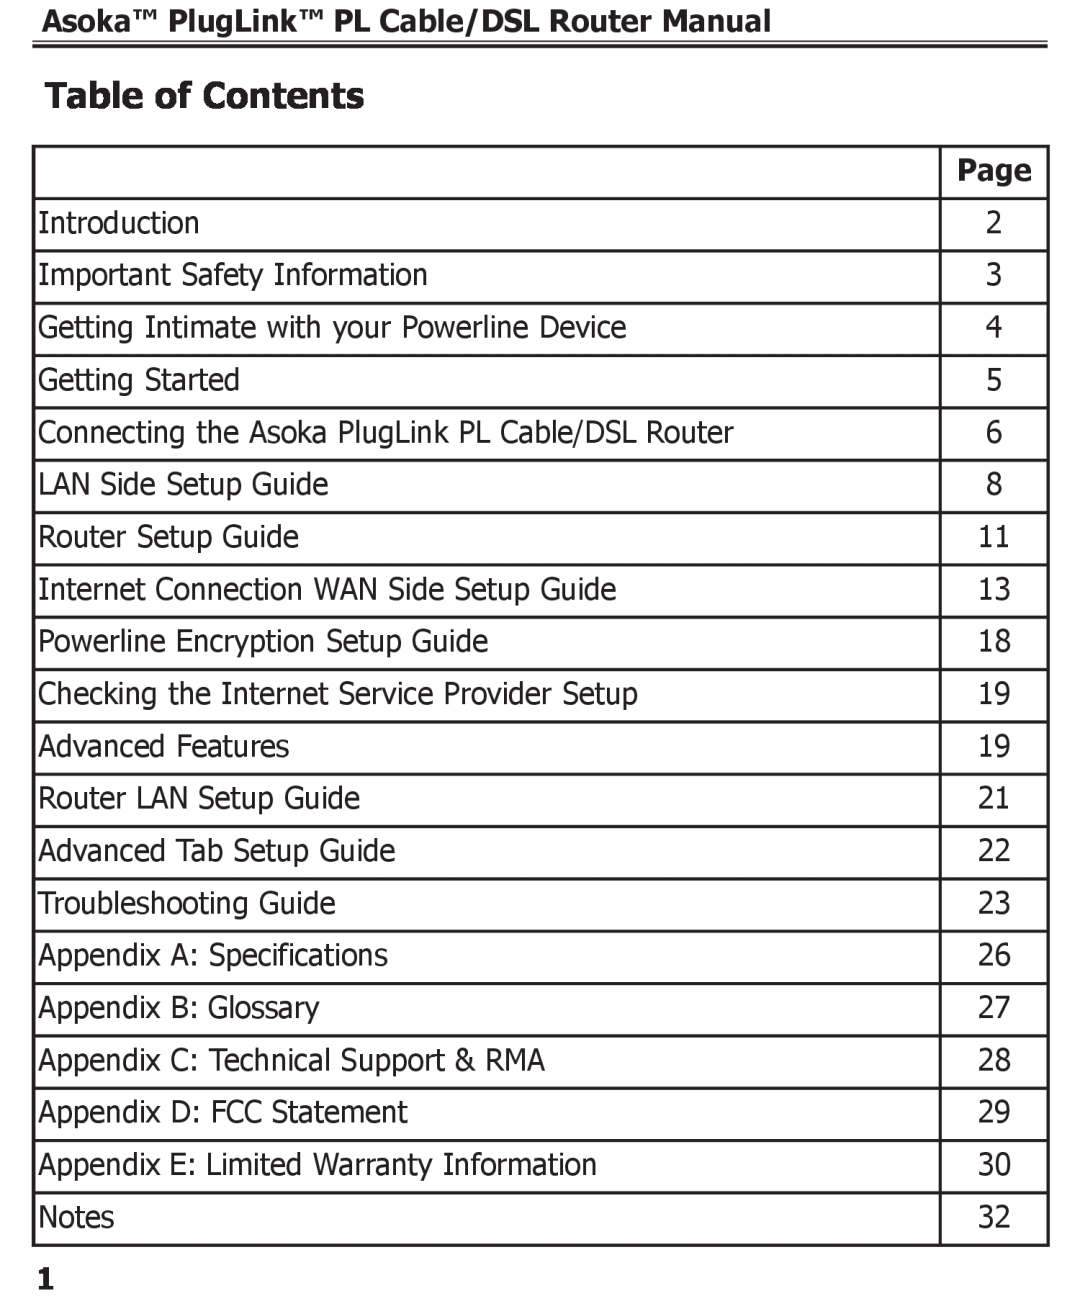 Asoka PL9920-BBR specifications Table of Contents, Asoka PlugLink PL Cable/DSL Router Manual, Page 